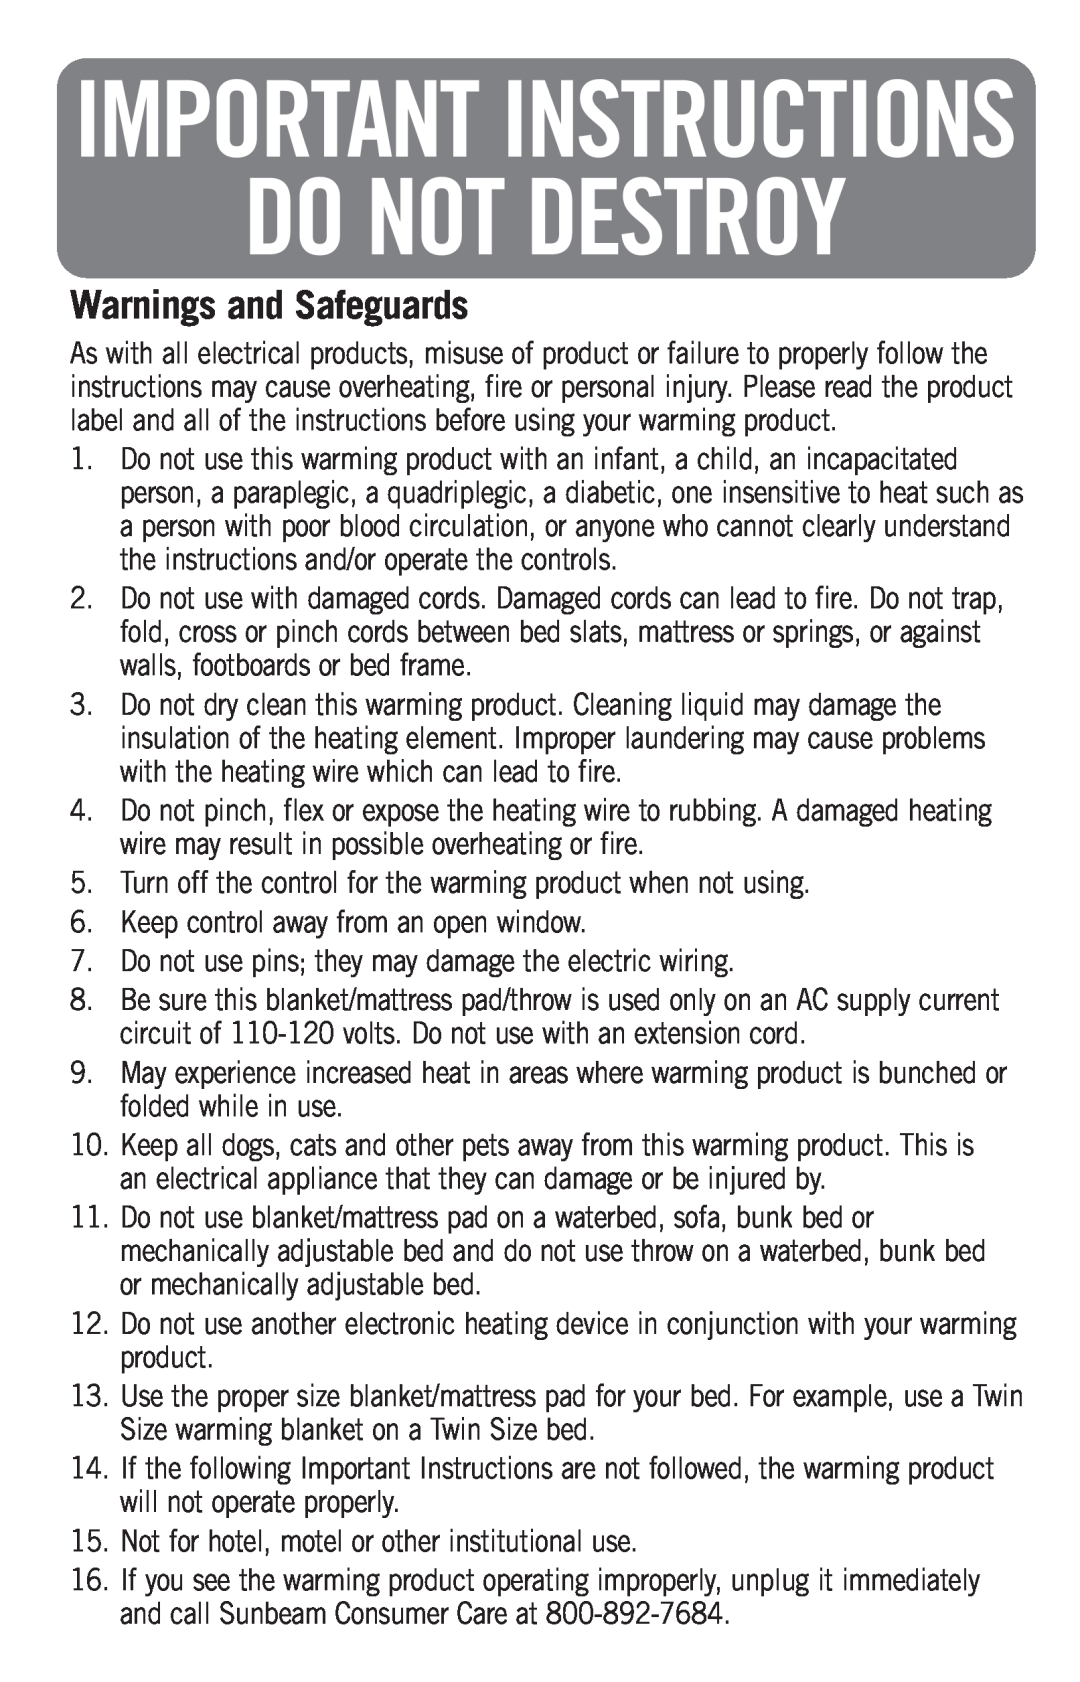 Sunbeam Electric Heater manual Warnings and Safeguards, Do Not Destroy, Important Instructions 